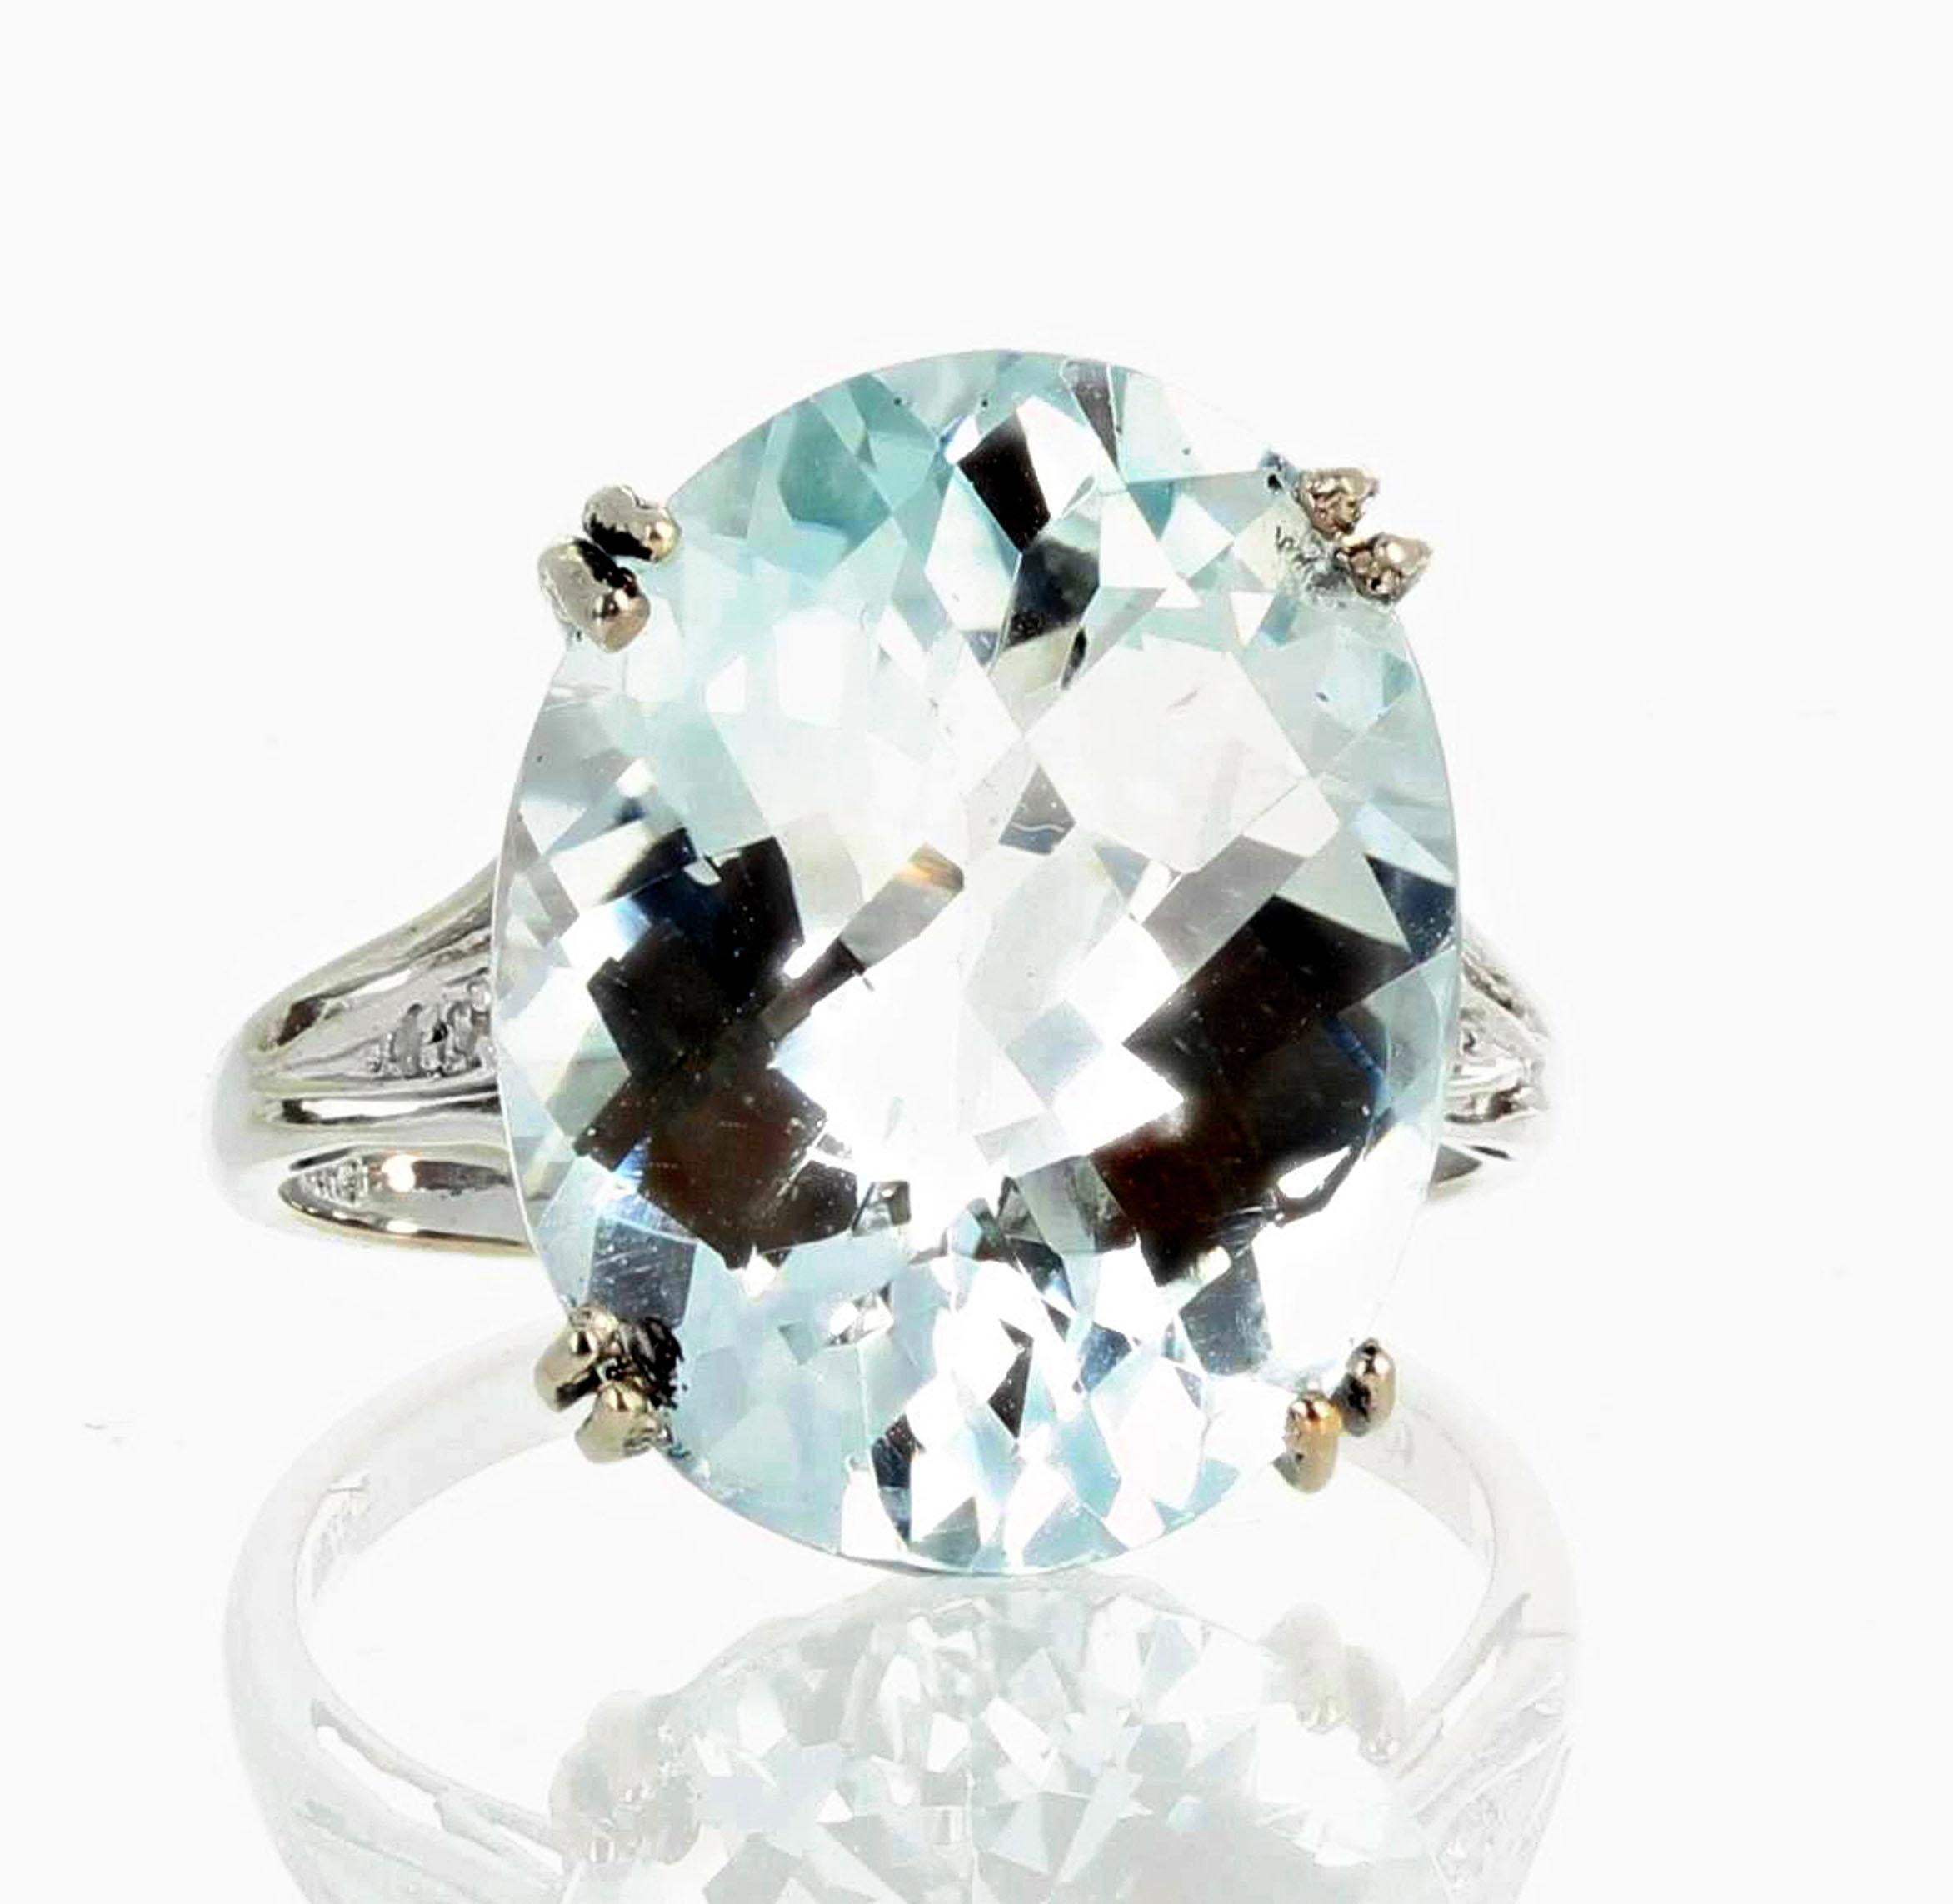 AJD RARE NATURAL Stunning Clear 15.4 Carat Blue Topaz & Diamonds Ring For Sale 1